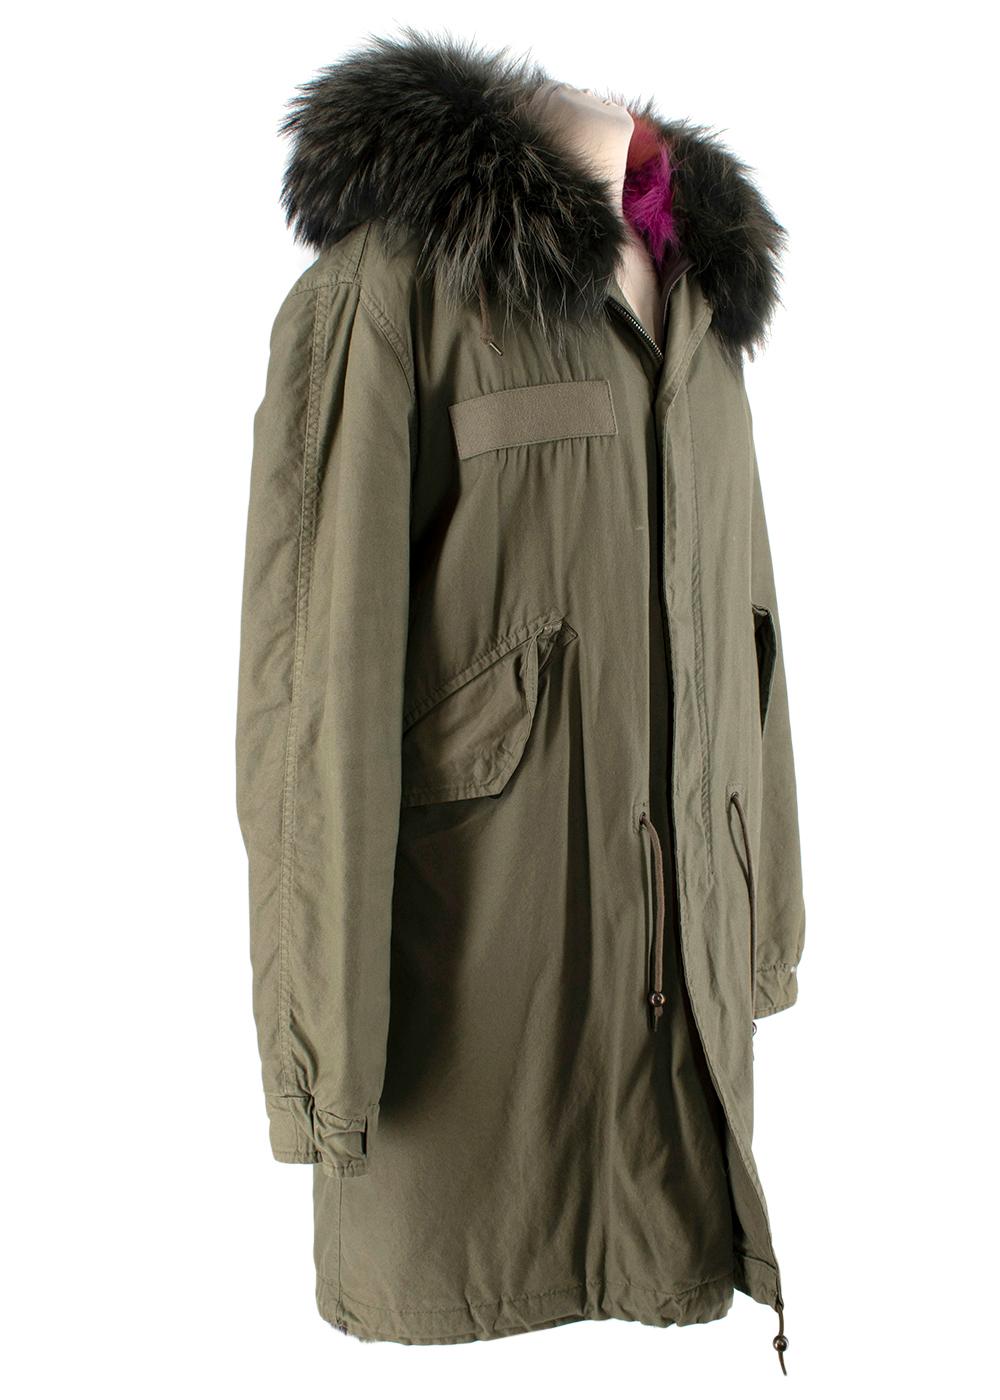 Mr & Mrs Italy Fox & Racoon Fur Trimmed Khaki Army Parka

- Signature army style parka from the Italian brand fully lined in multicolour fox fur, and trimmed with racoon pelts in a dark natural tone
- Racoon trim fully removable 
- Interior fox in a